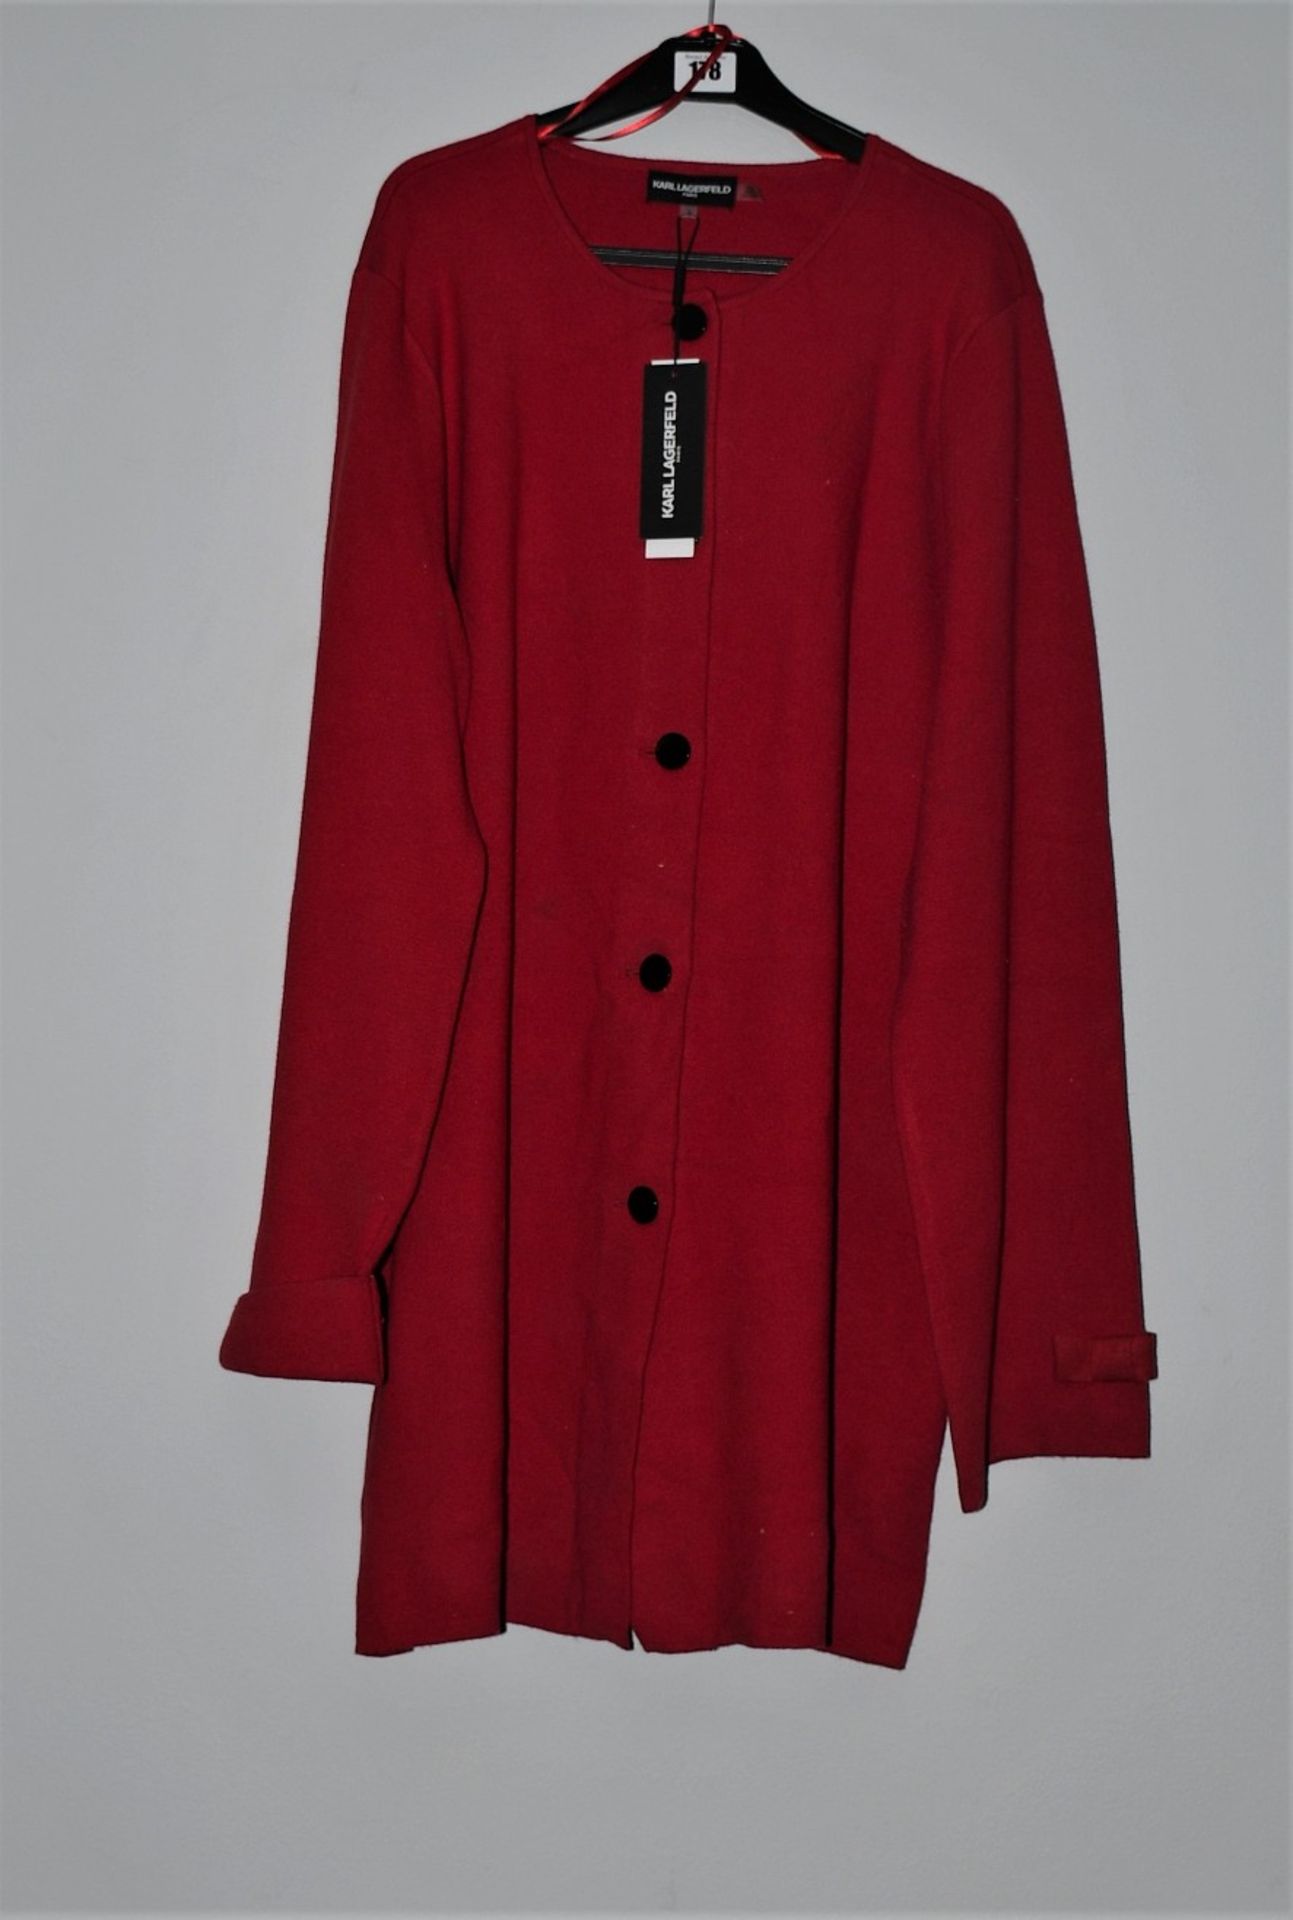 One as new Karl Lagerfeld Paris Double Knit red Cardigan Jacket size L (06AF053).